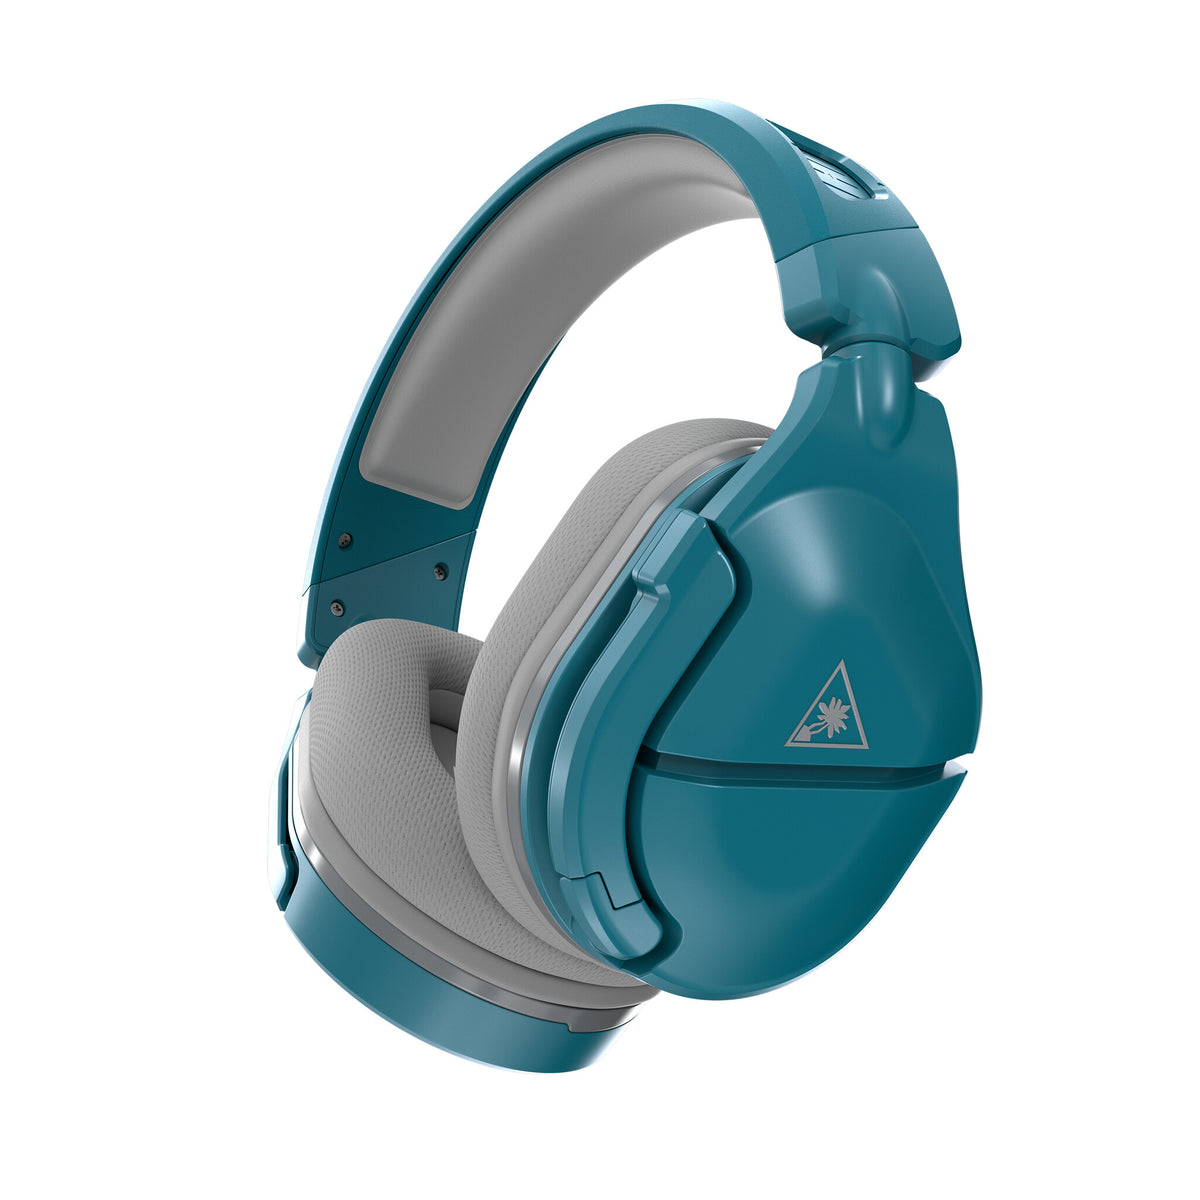 Turtle Beach Stealth 600 (Gen 2) MAX - Wireless Gaming Headset in Teal